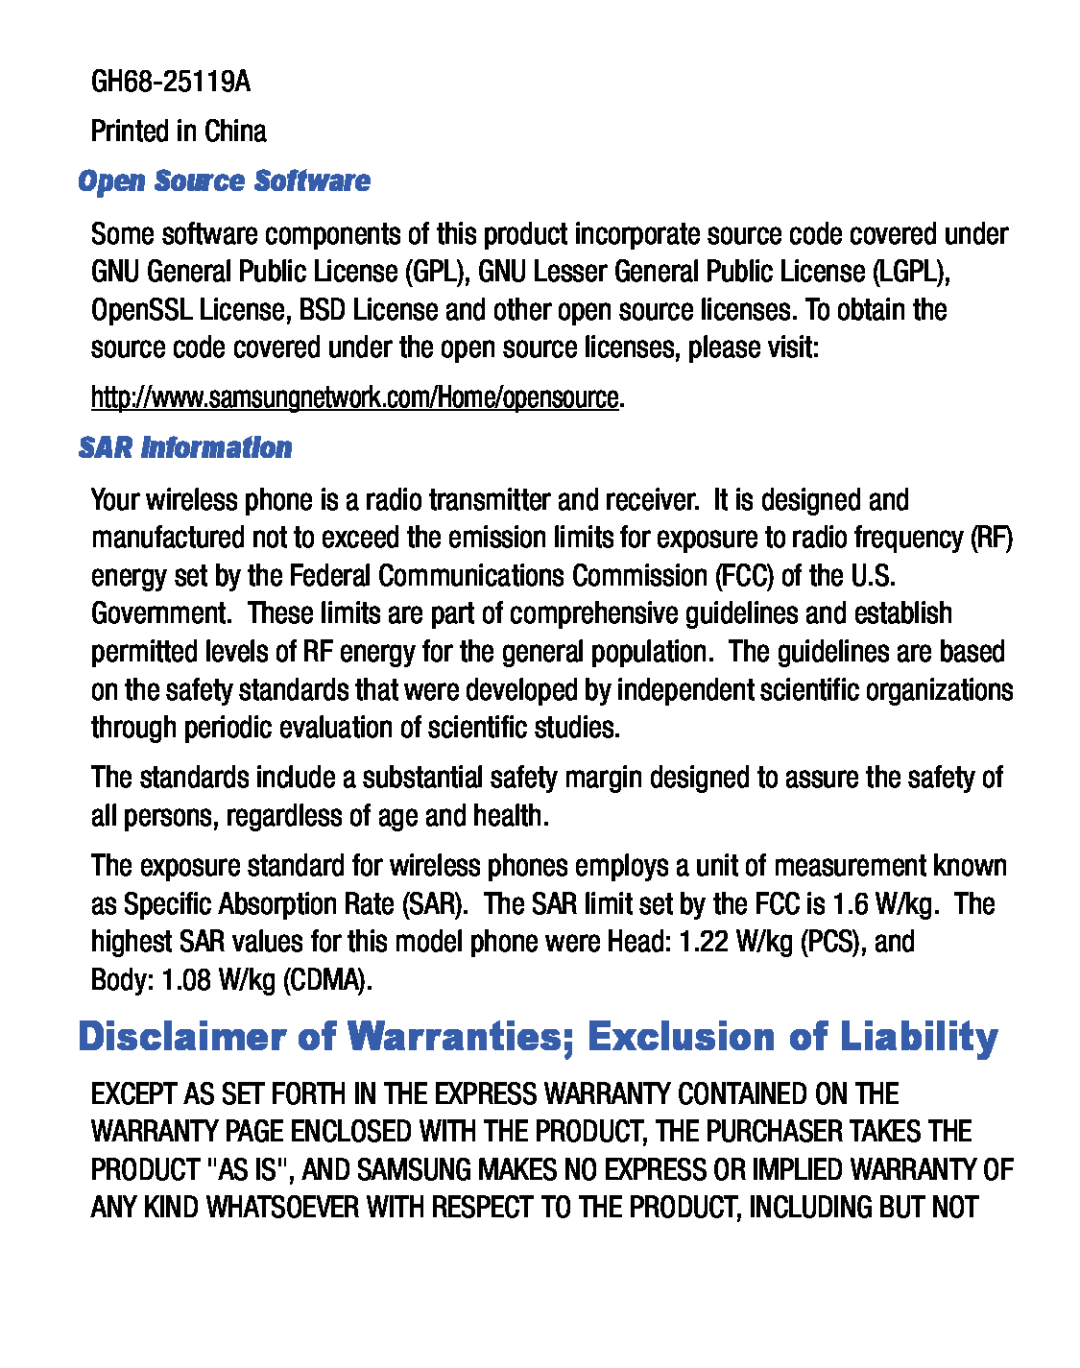 Samsung GH68-25119A user manual Disclaimer of Warranties Exclusion of Liability, Open Source Software, SAR Information 